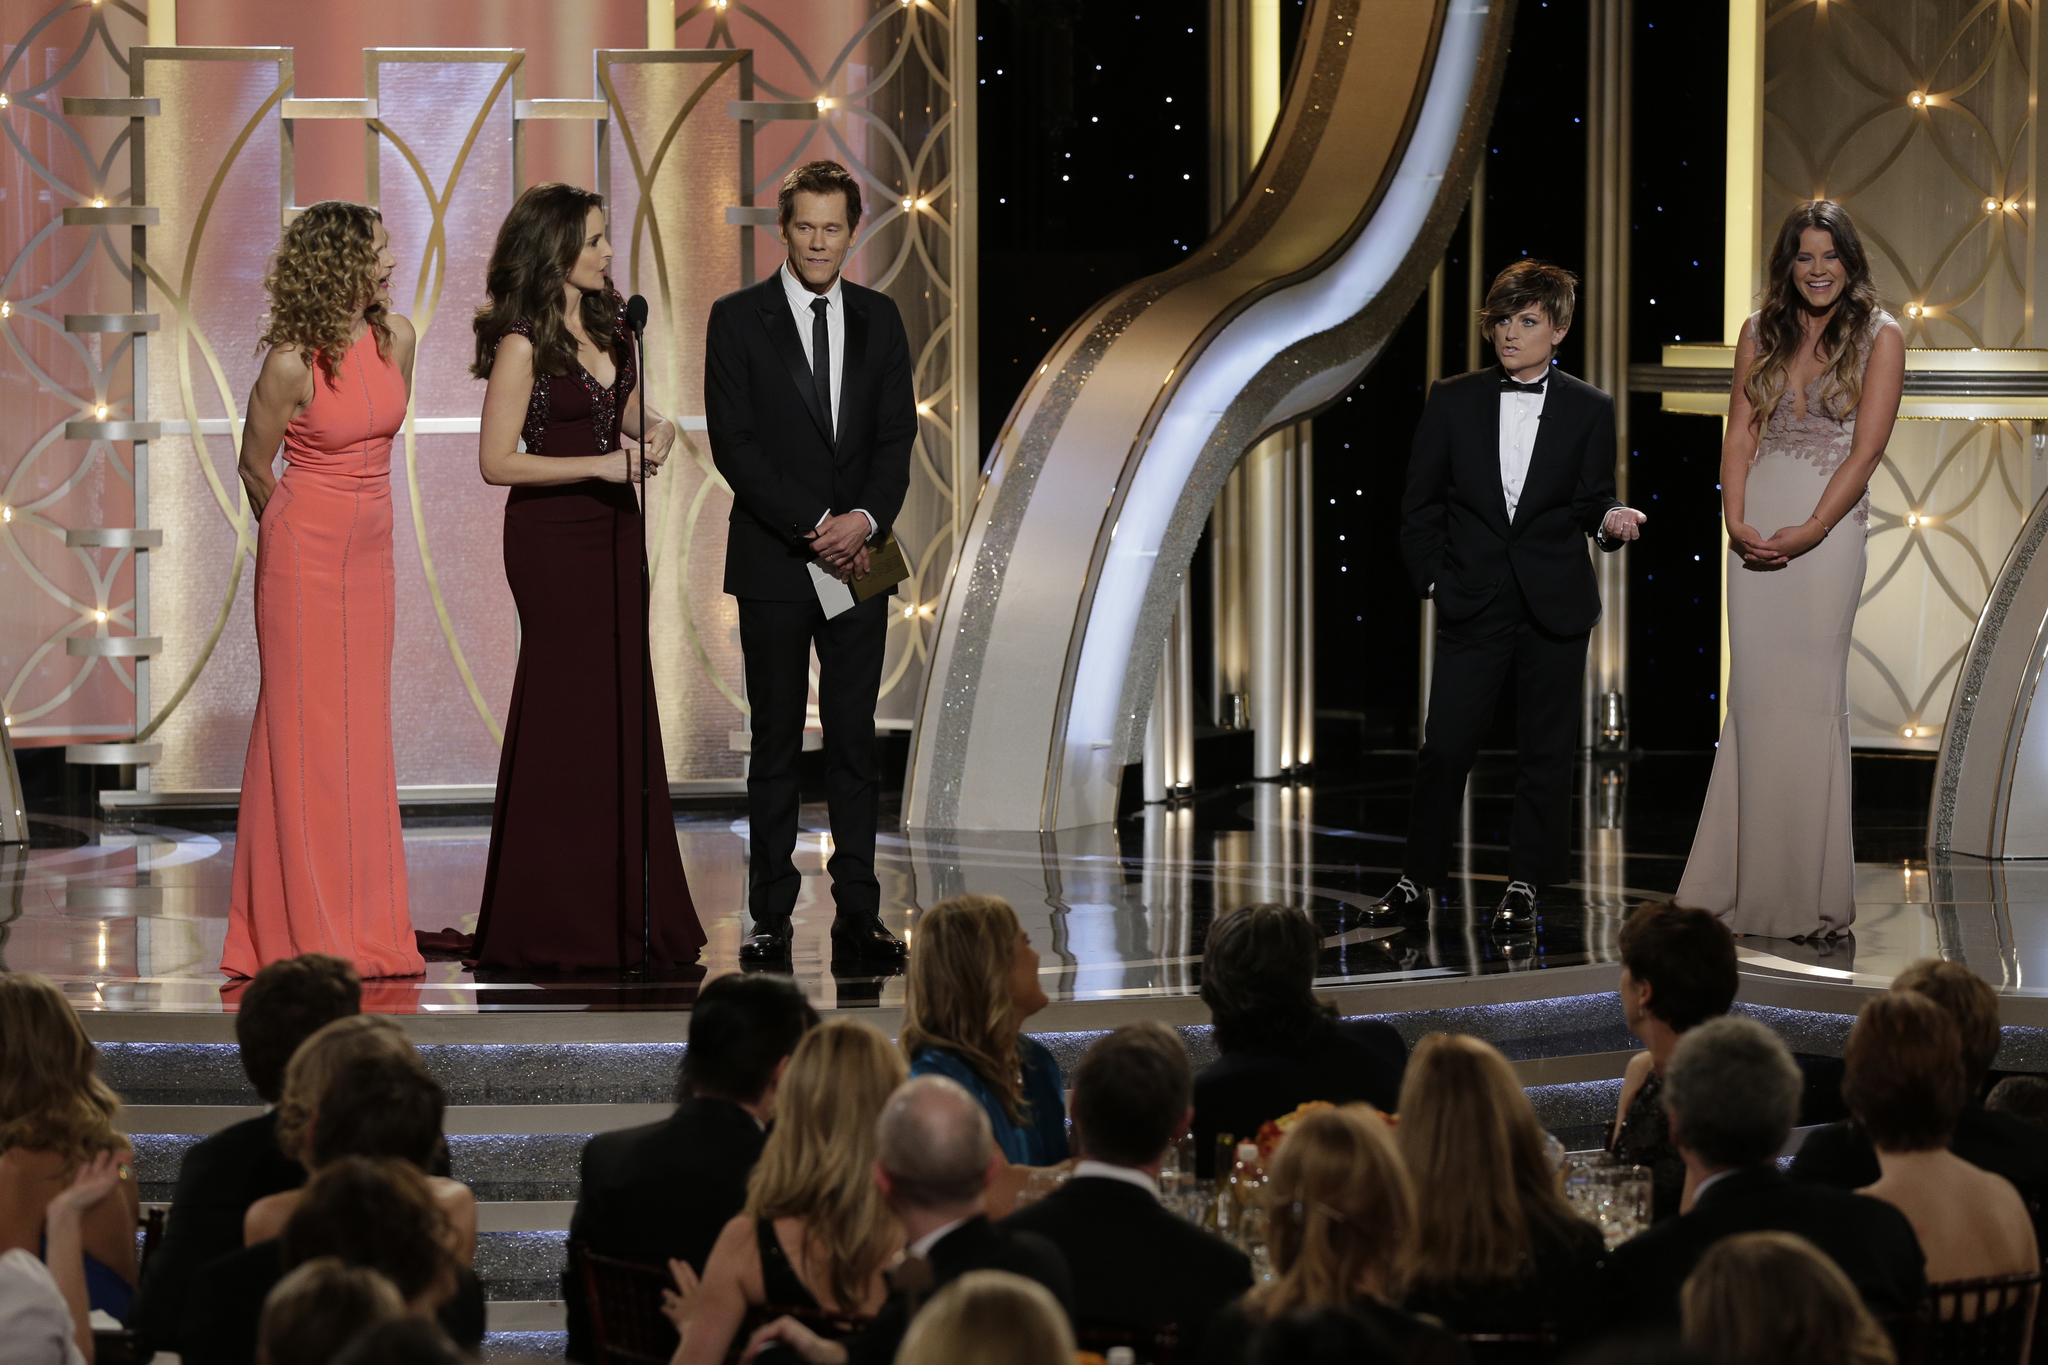 Kevin Bacon, Kyra Sedgwick, Tina Fey, Amy Poehler and Sosie Bacon at event of 71st Golden Globe Awards (2014)